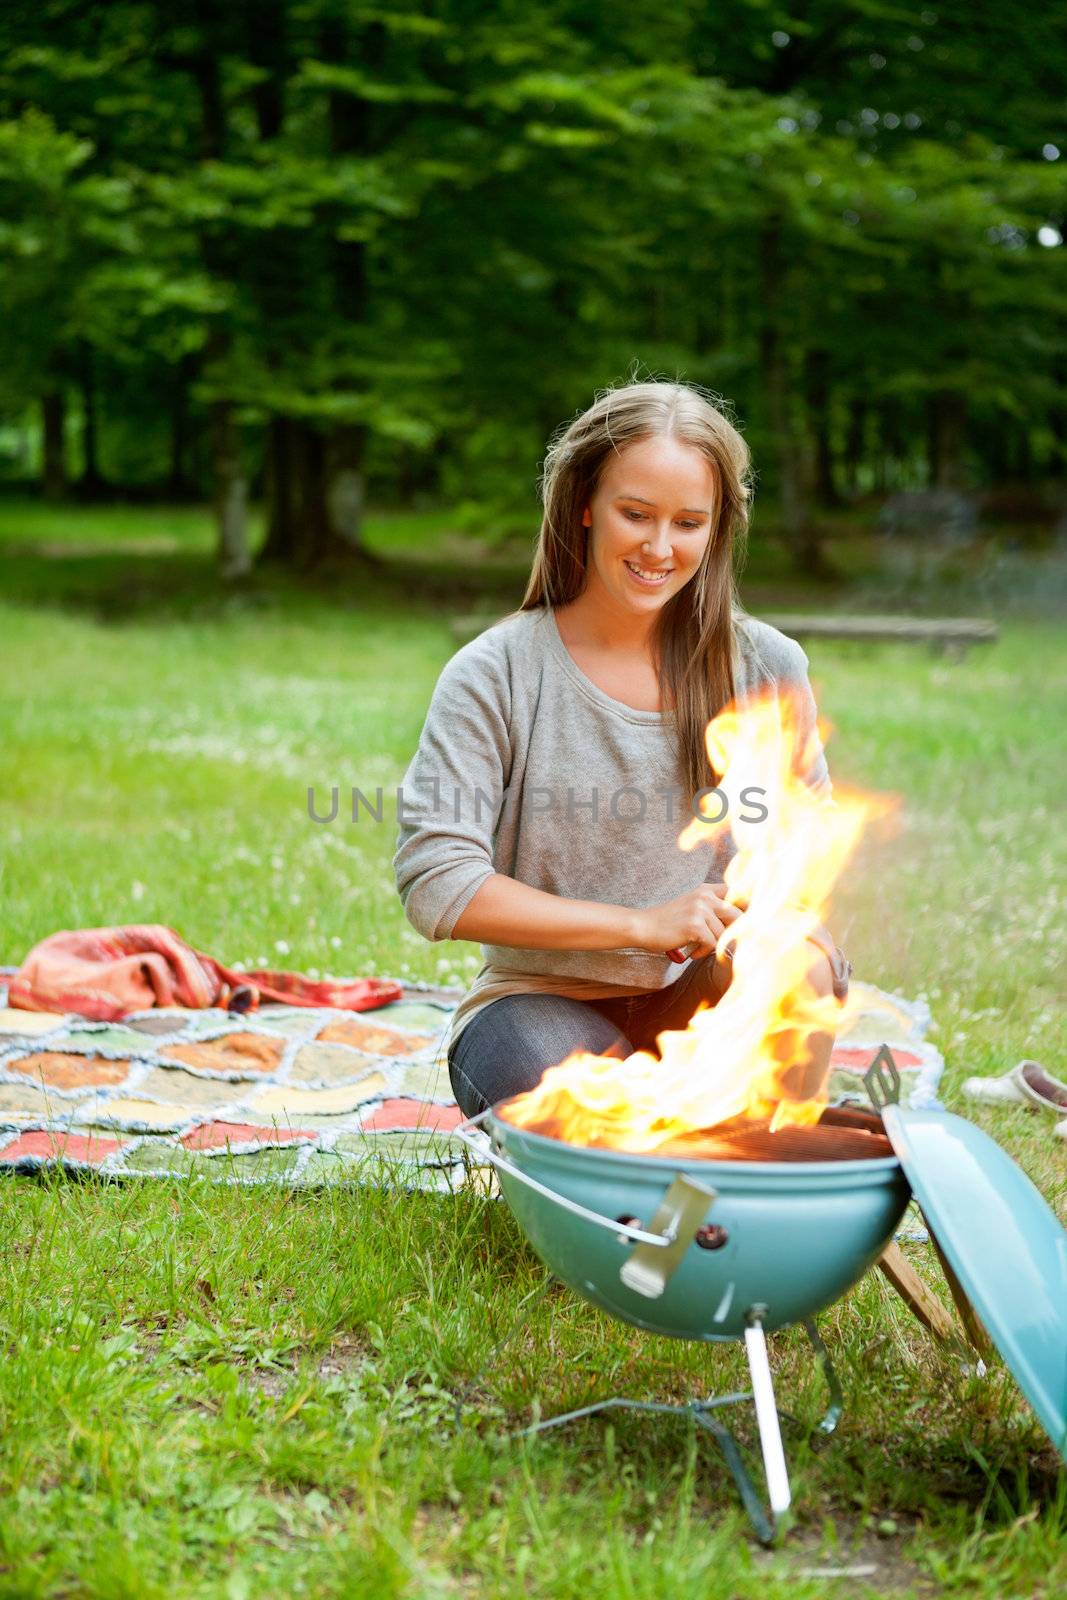 Female Preparing Meal On Flaming Barbecue by leaf